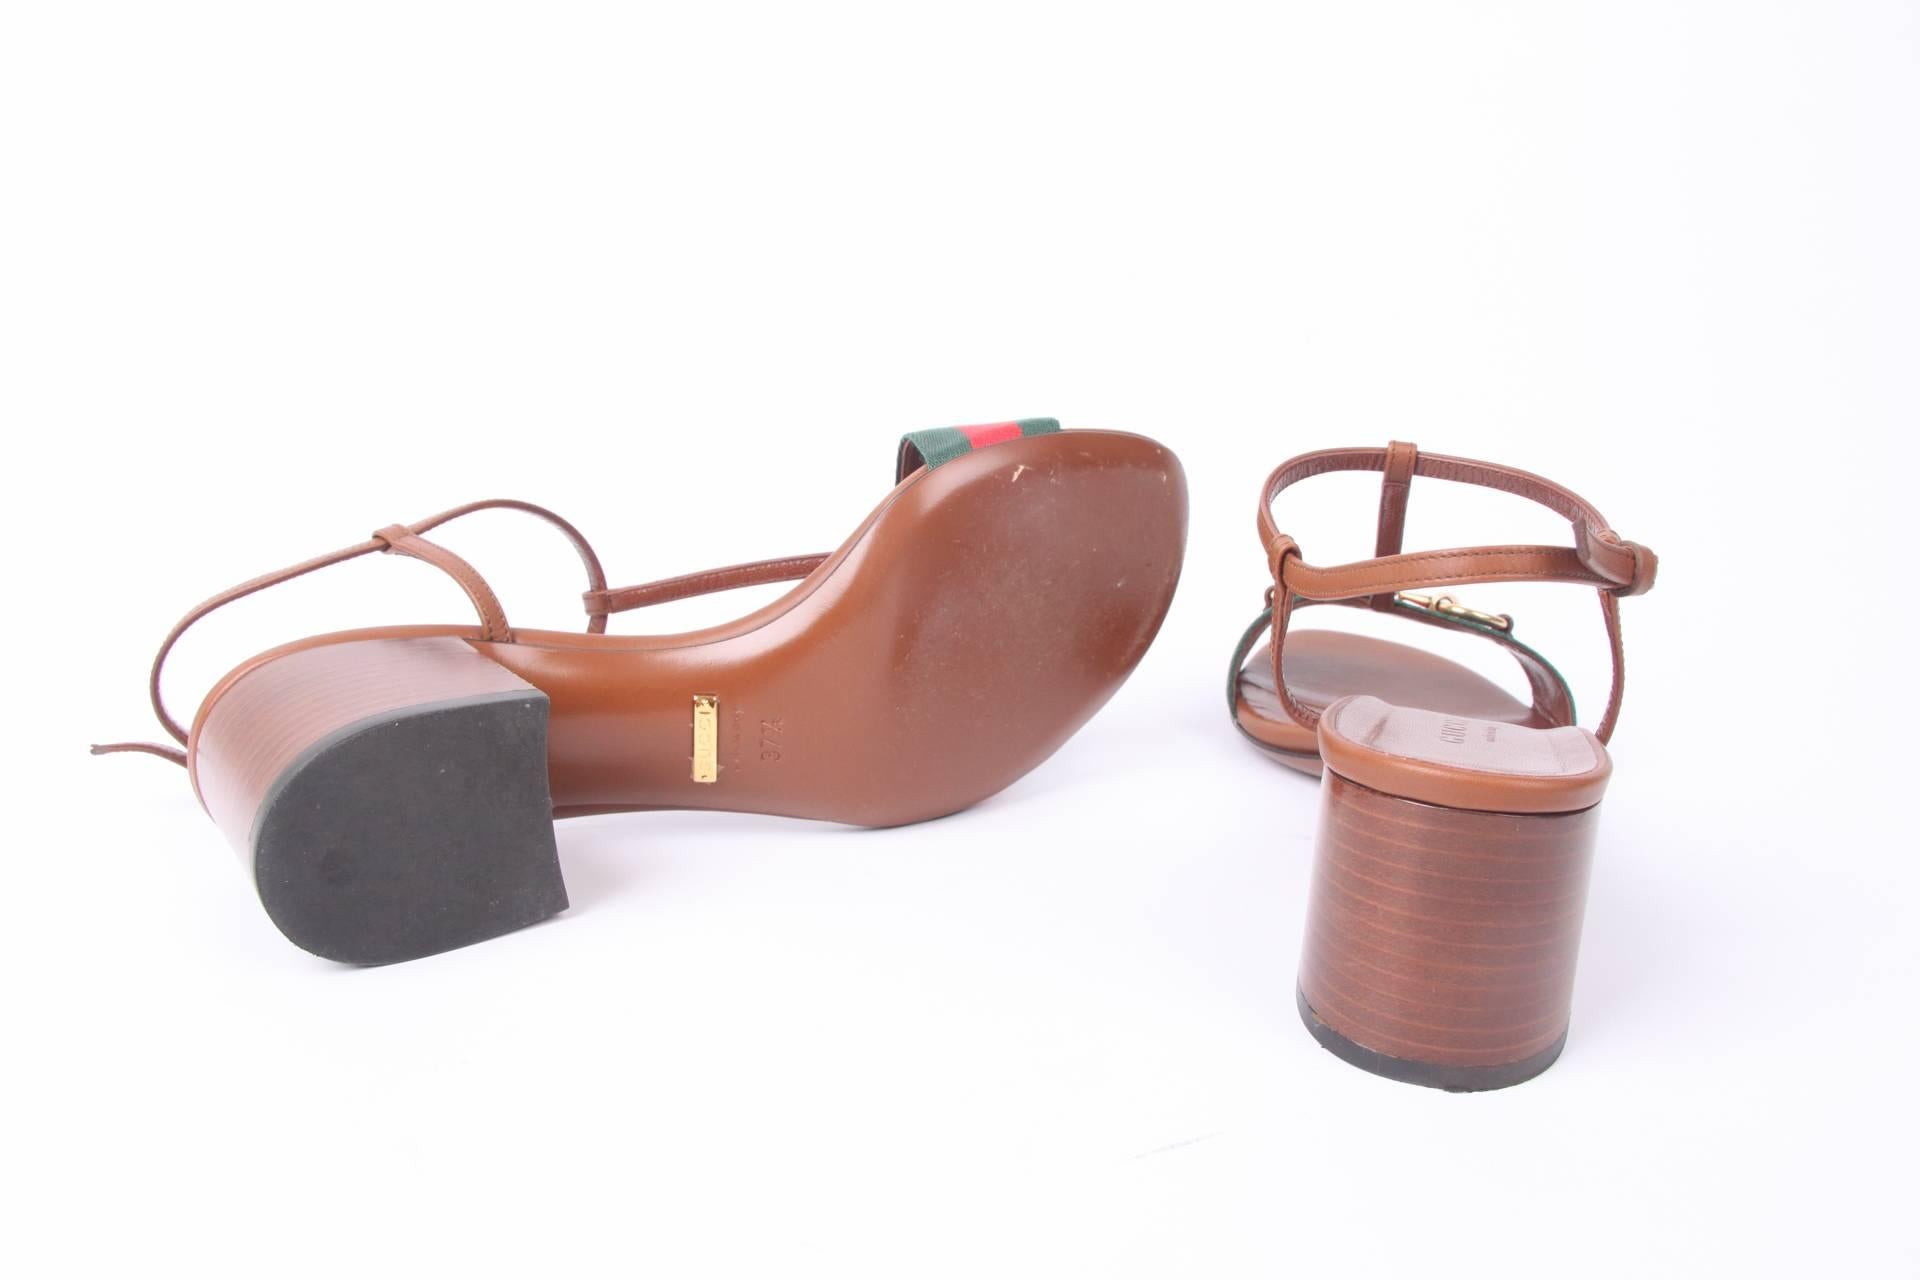 The characteristic Gucci features are all over these fabulous sandals!

The strap on the instep is crafted in red and green with the welknown gold-tone horsebit on top. A thin brown leather strap crossed the foot and buckle fastening ankle strap.